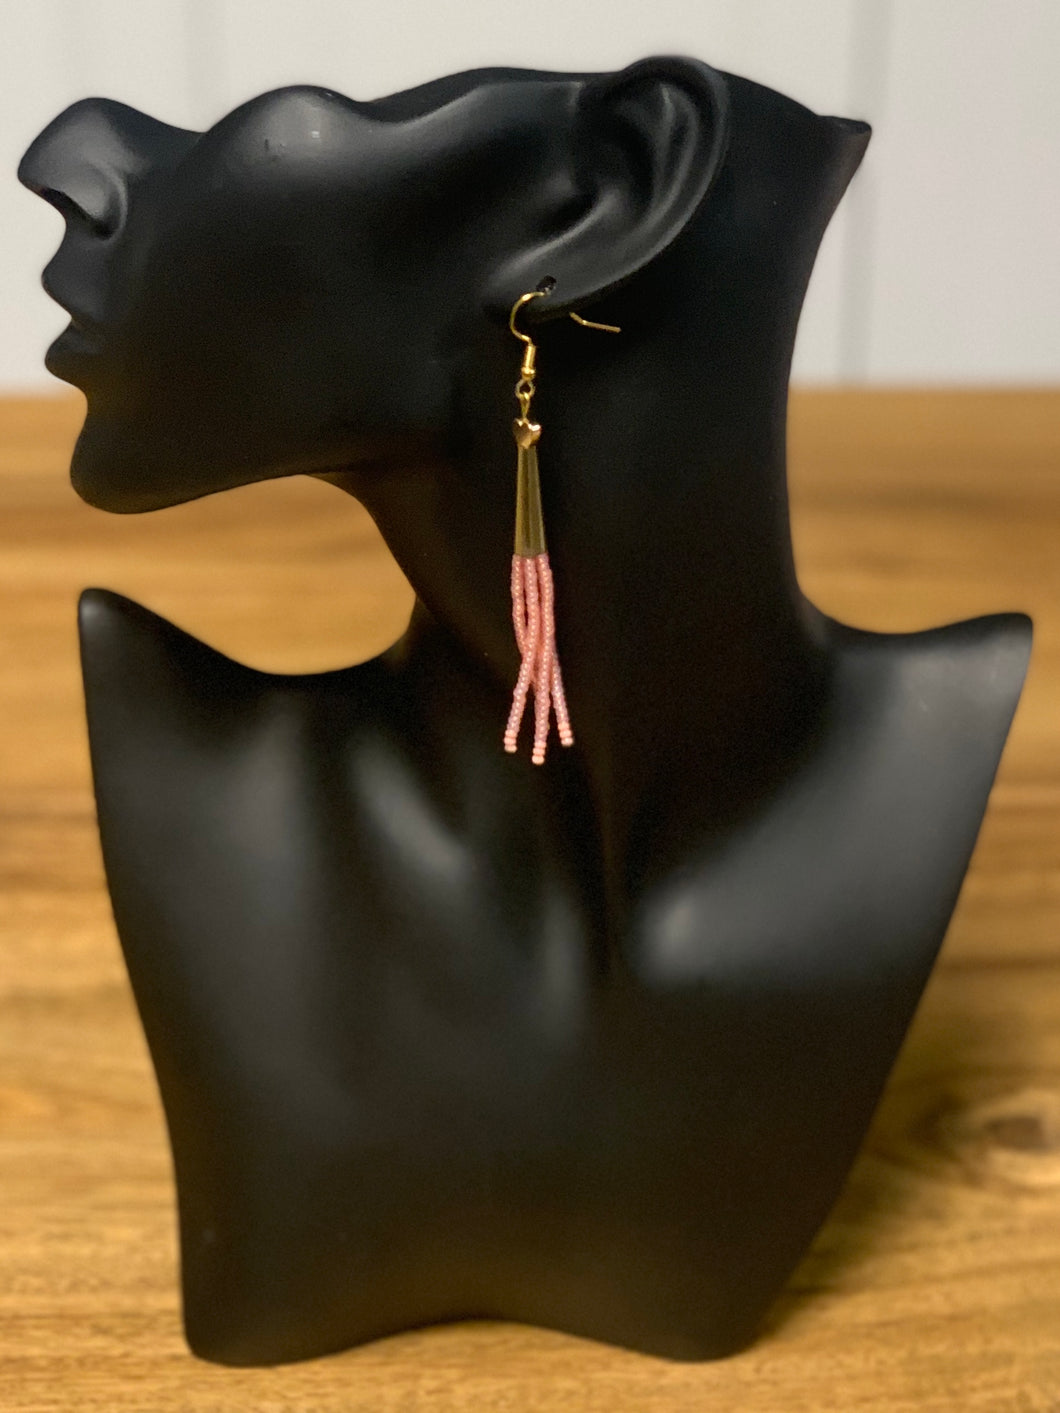 Dangling gold earrings with five strands of dangling pink beads.